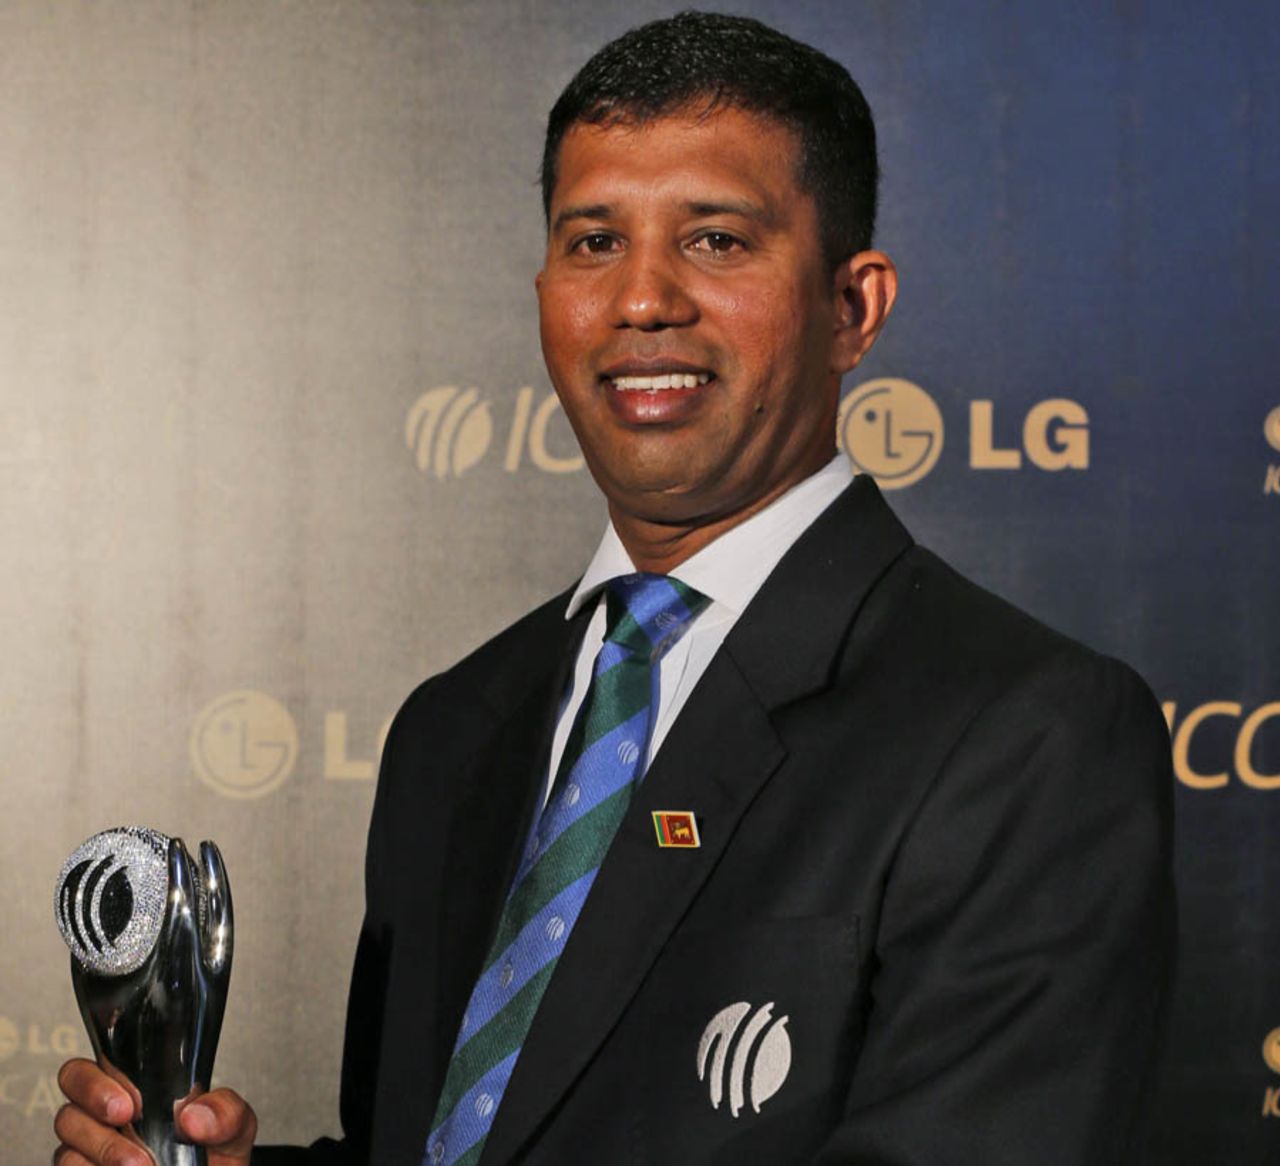 Kumar Dharmasena with the ICC Umpire of the Year award, Colombo, September 15, 2012